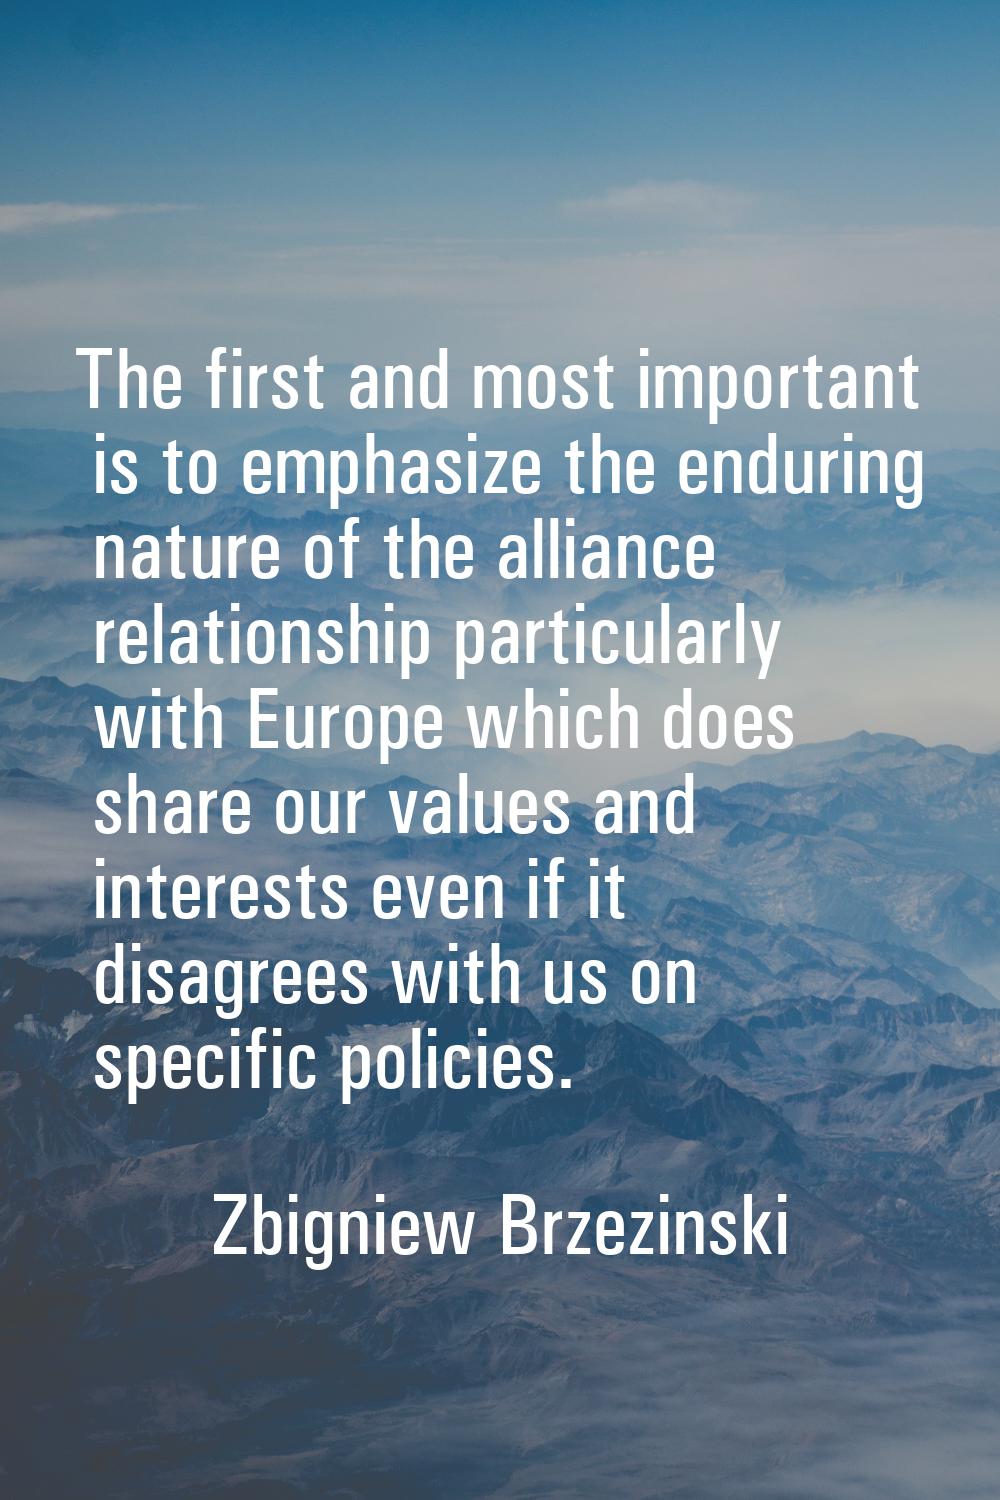 The first and most important is to emphasize the enduring nature of the alliance relationship parti